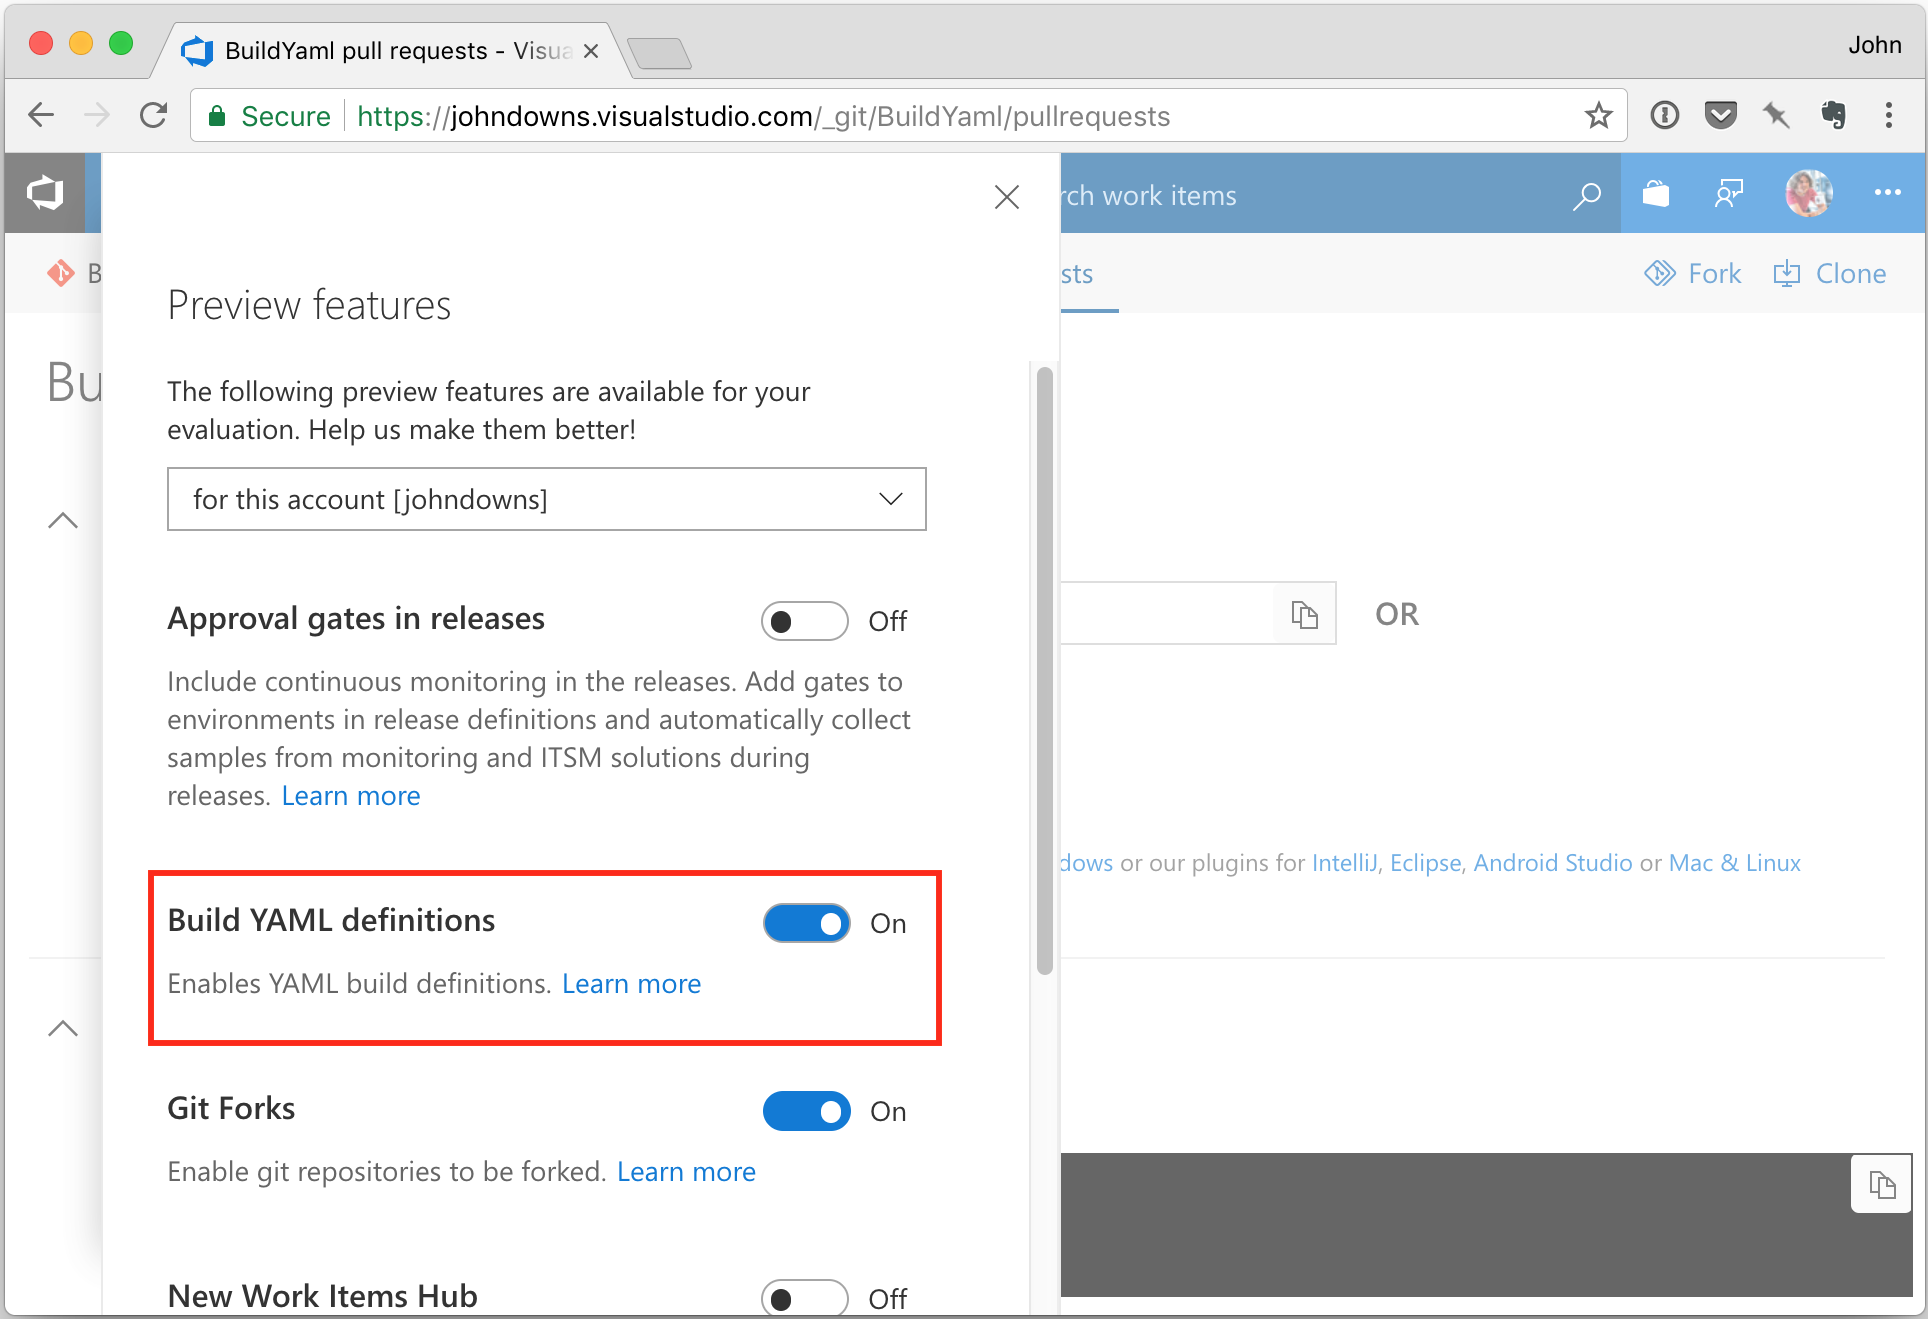 Enable Build YAML Definitions feature in VSTS